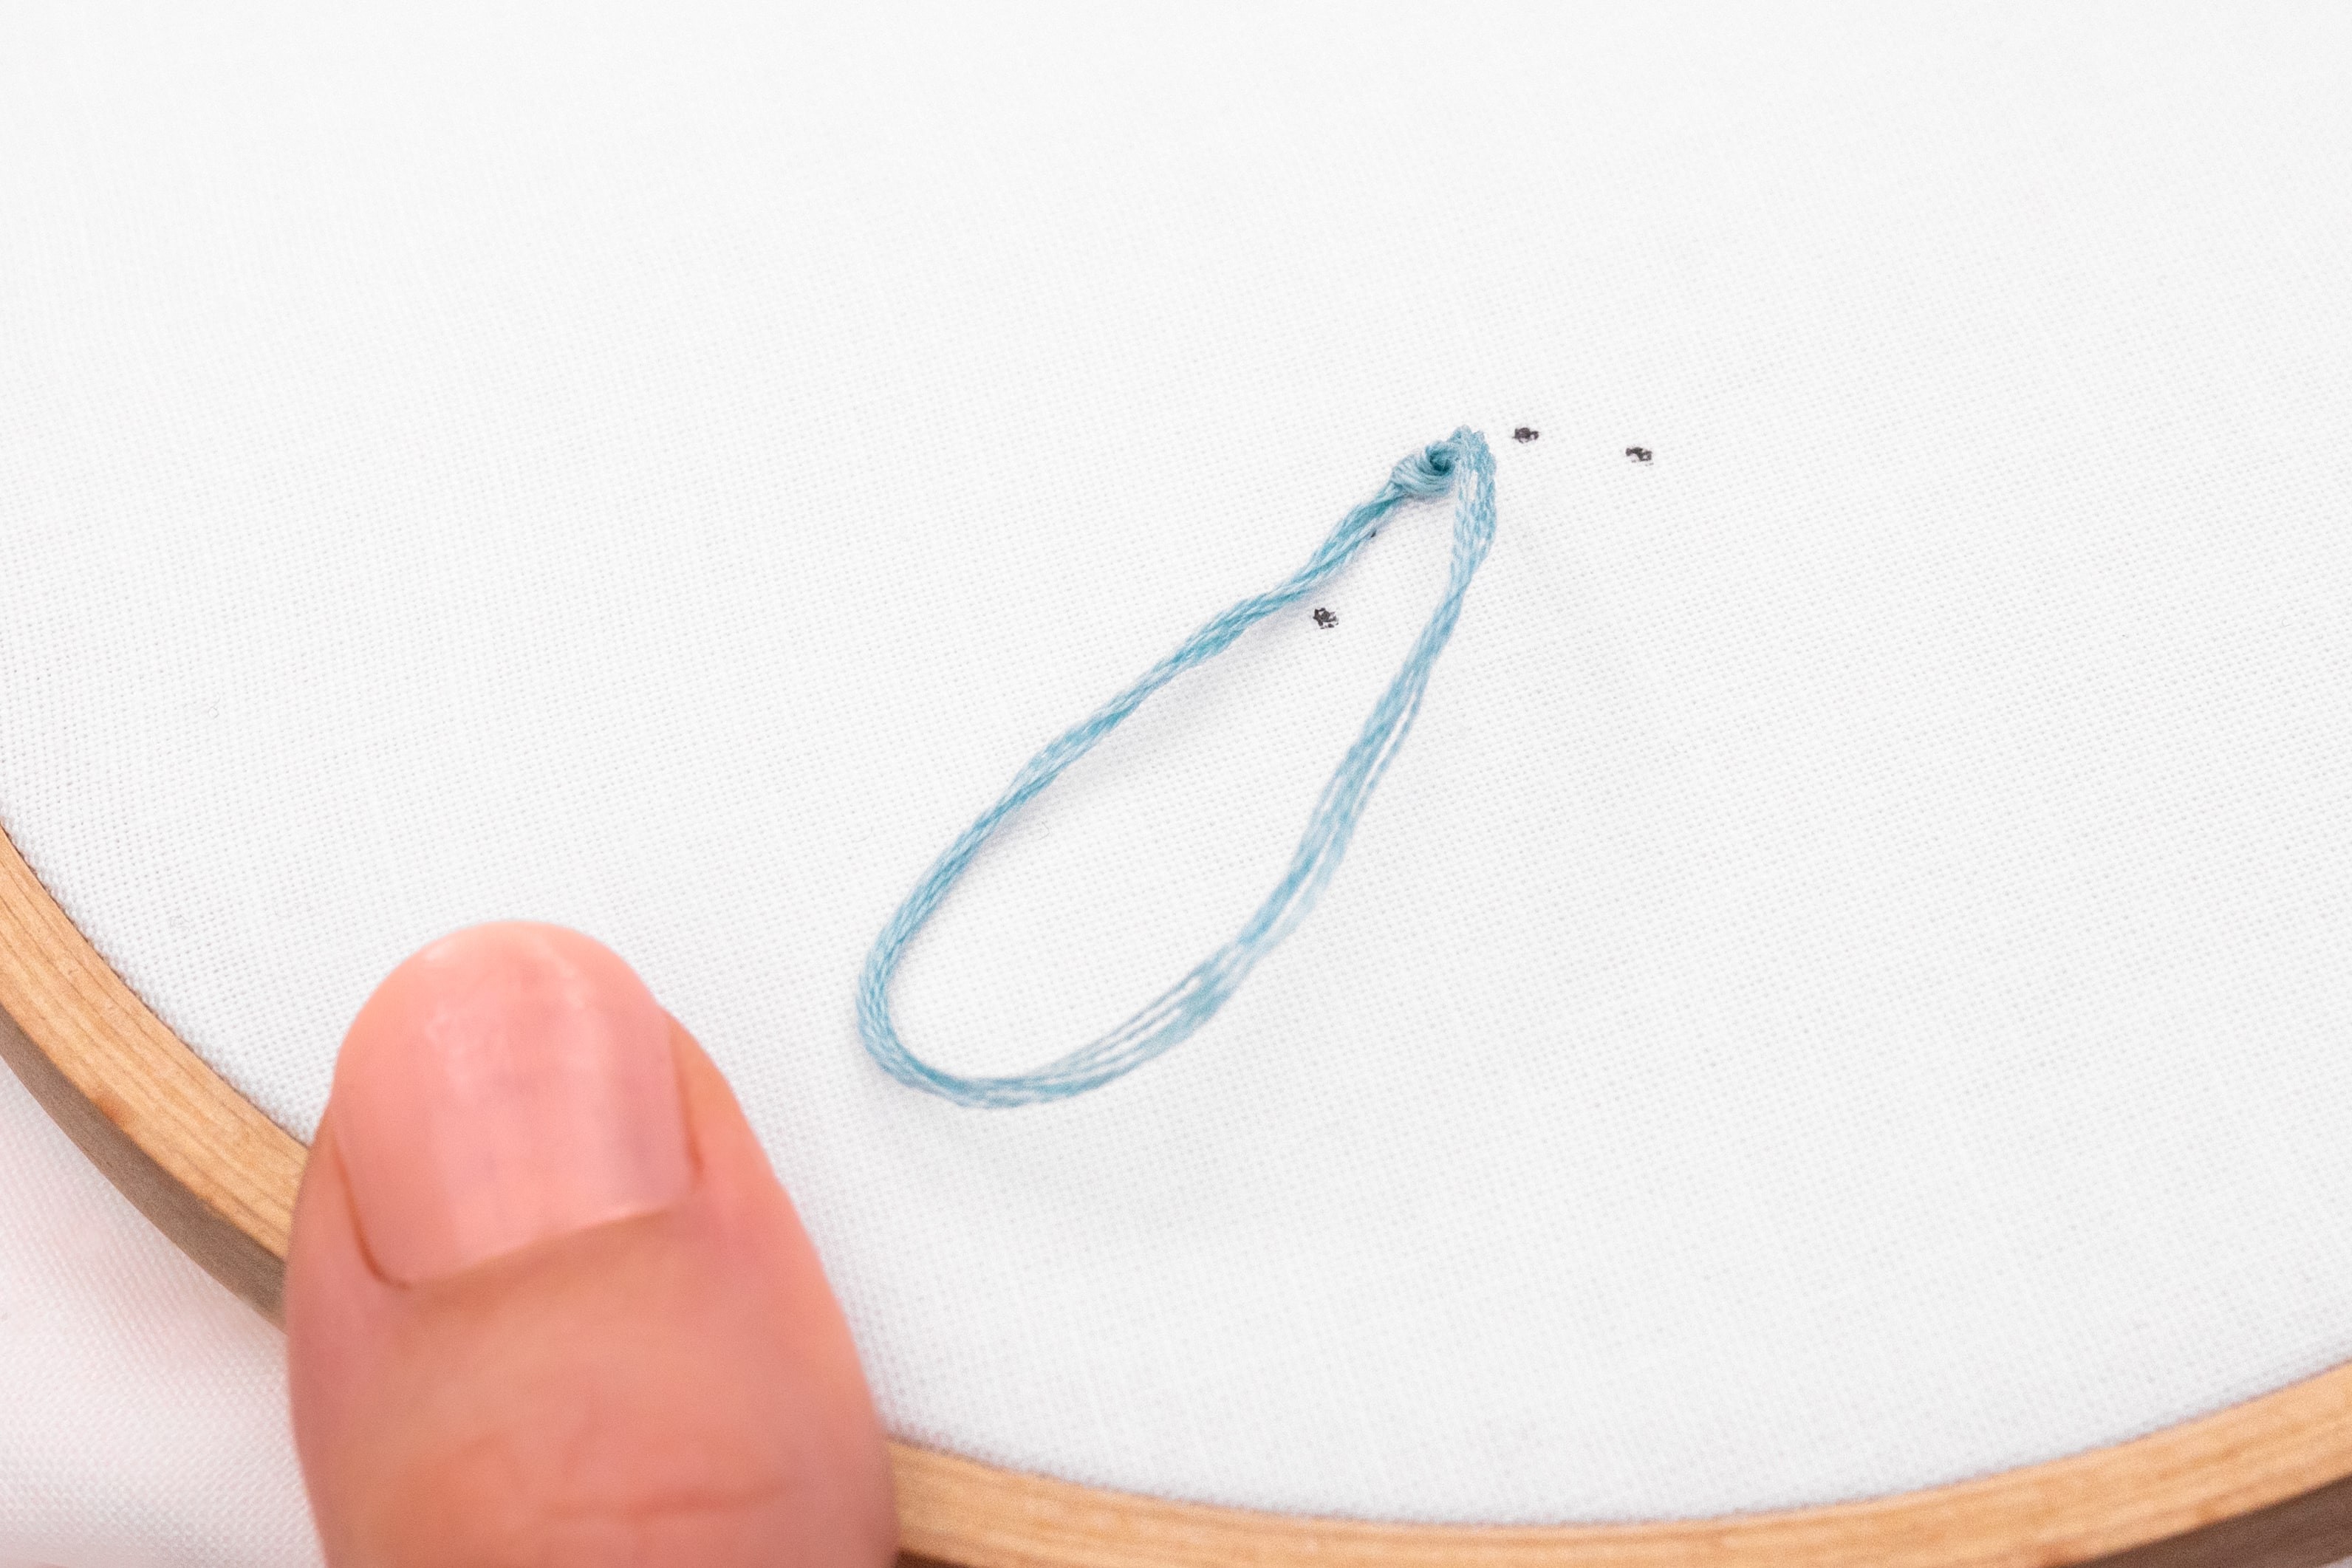 A loop of thread is being pulled into a knot.